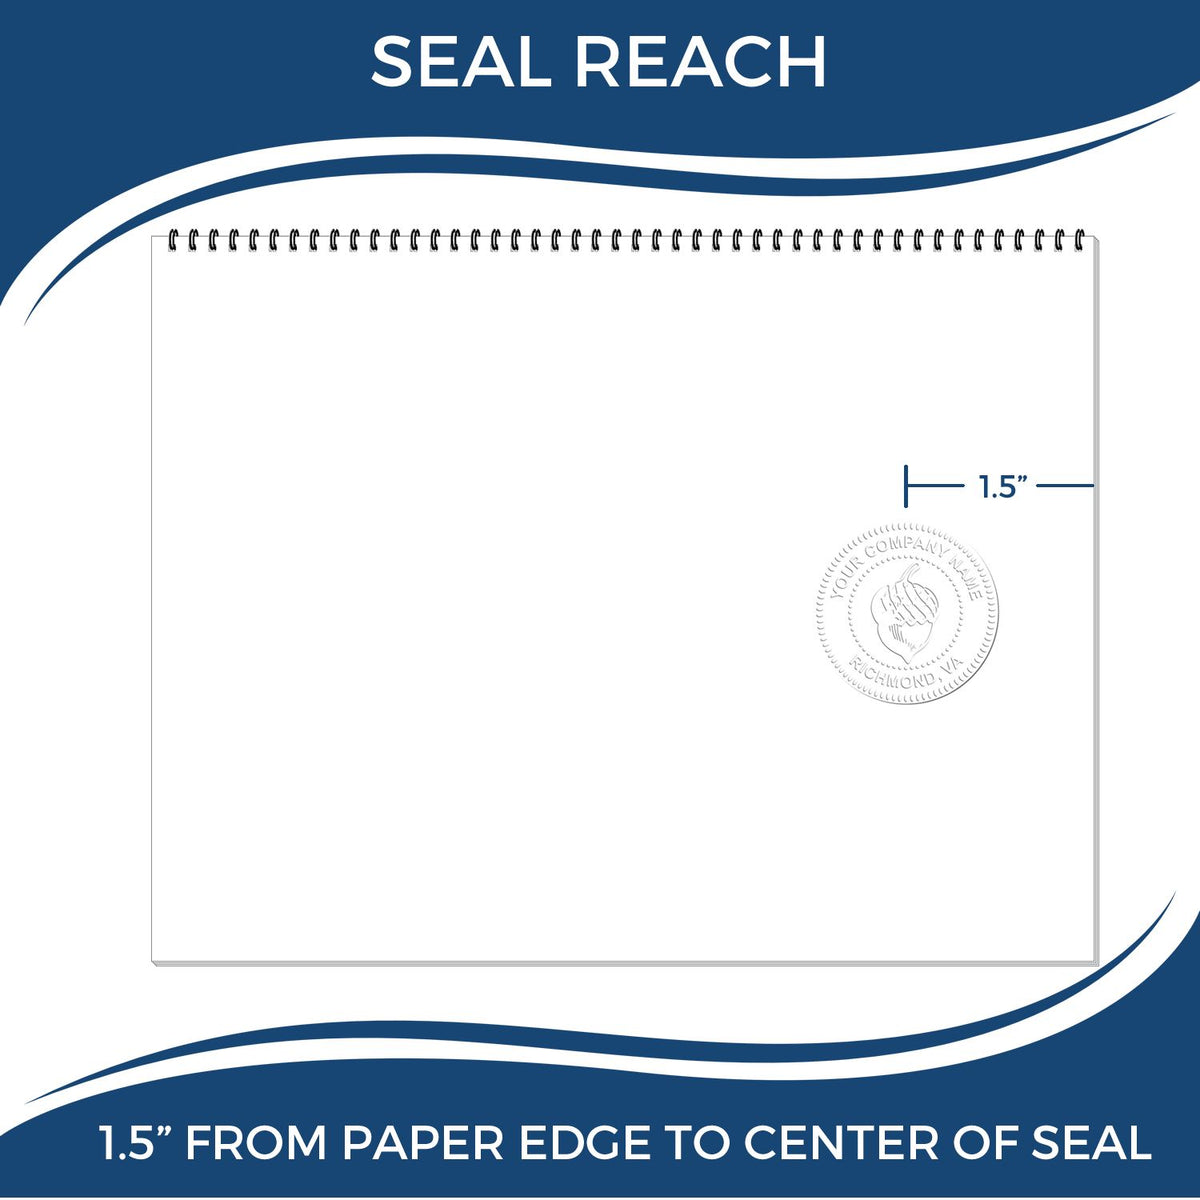 An infographic showing the seal reach which is represented by a ruler and a miniature seal image of the Hybrid Delaware Geologist Seal